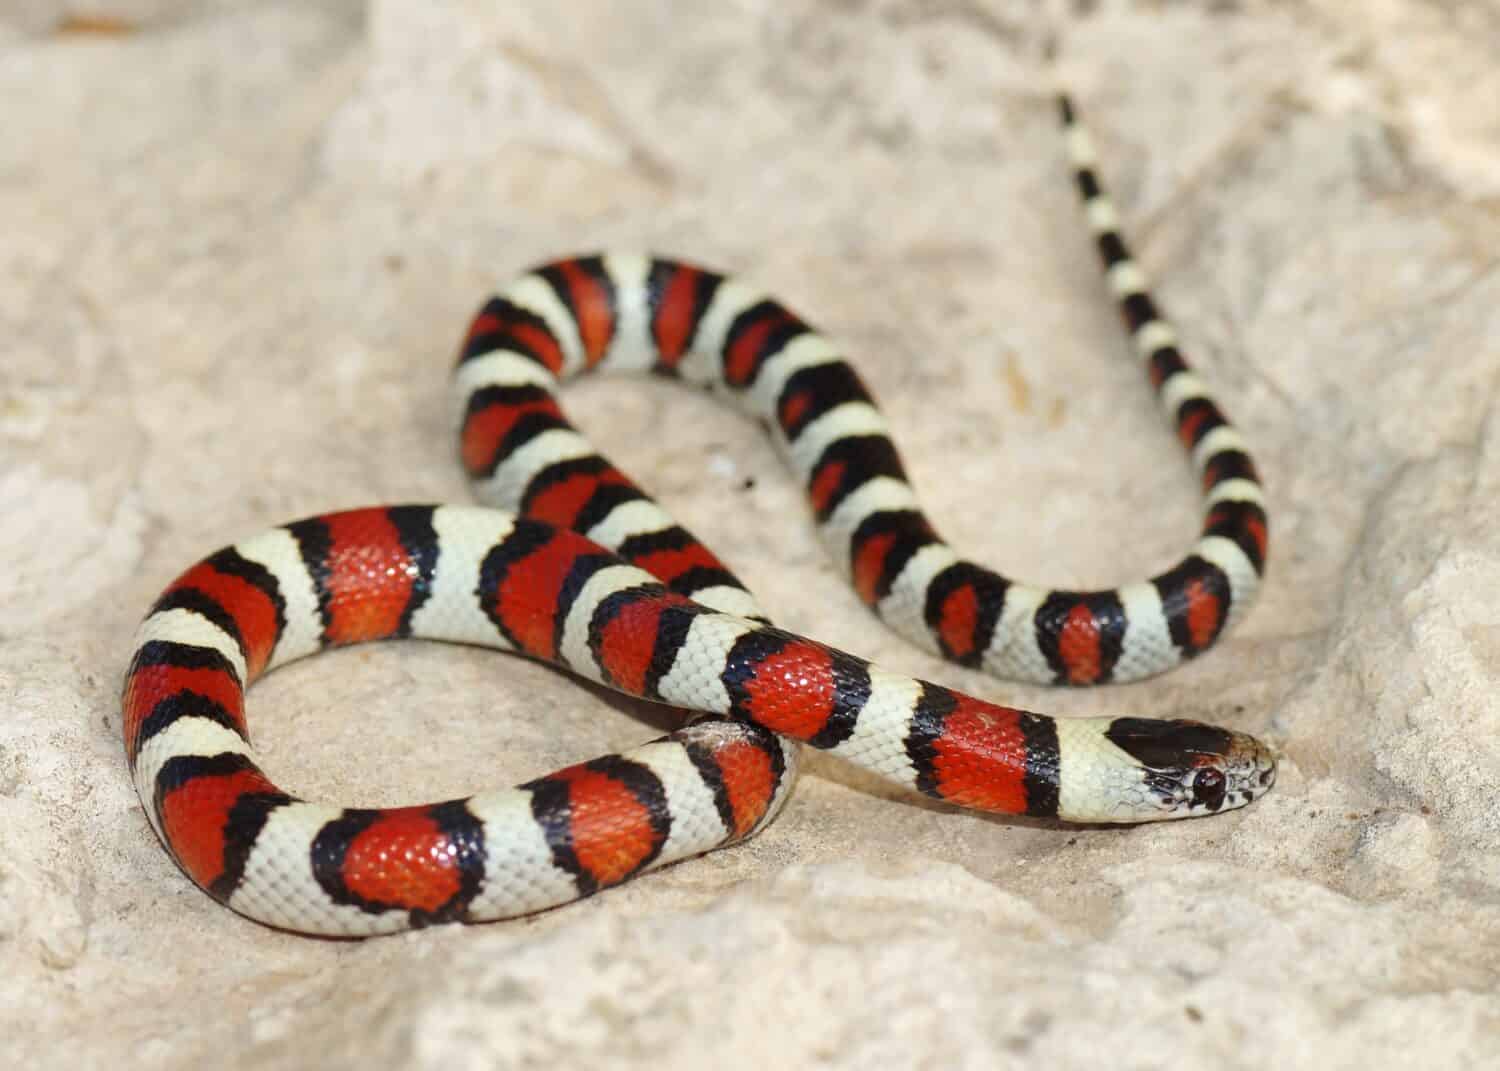 Coral Snake - red, black and white colors of a mimic snake, Lampropeltis triangulum gentilis 